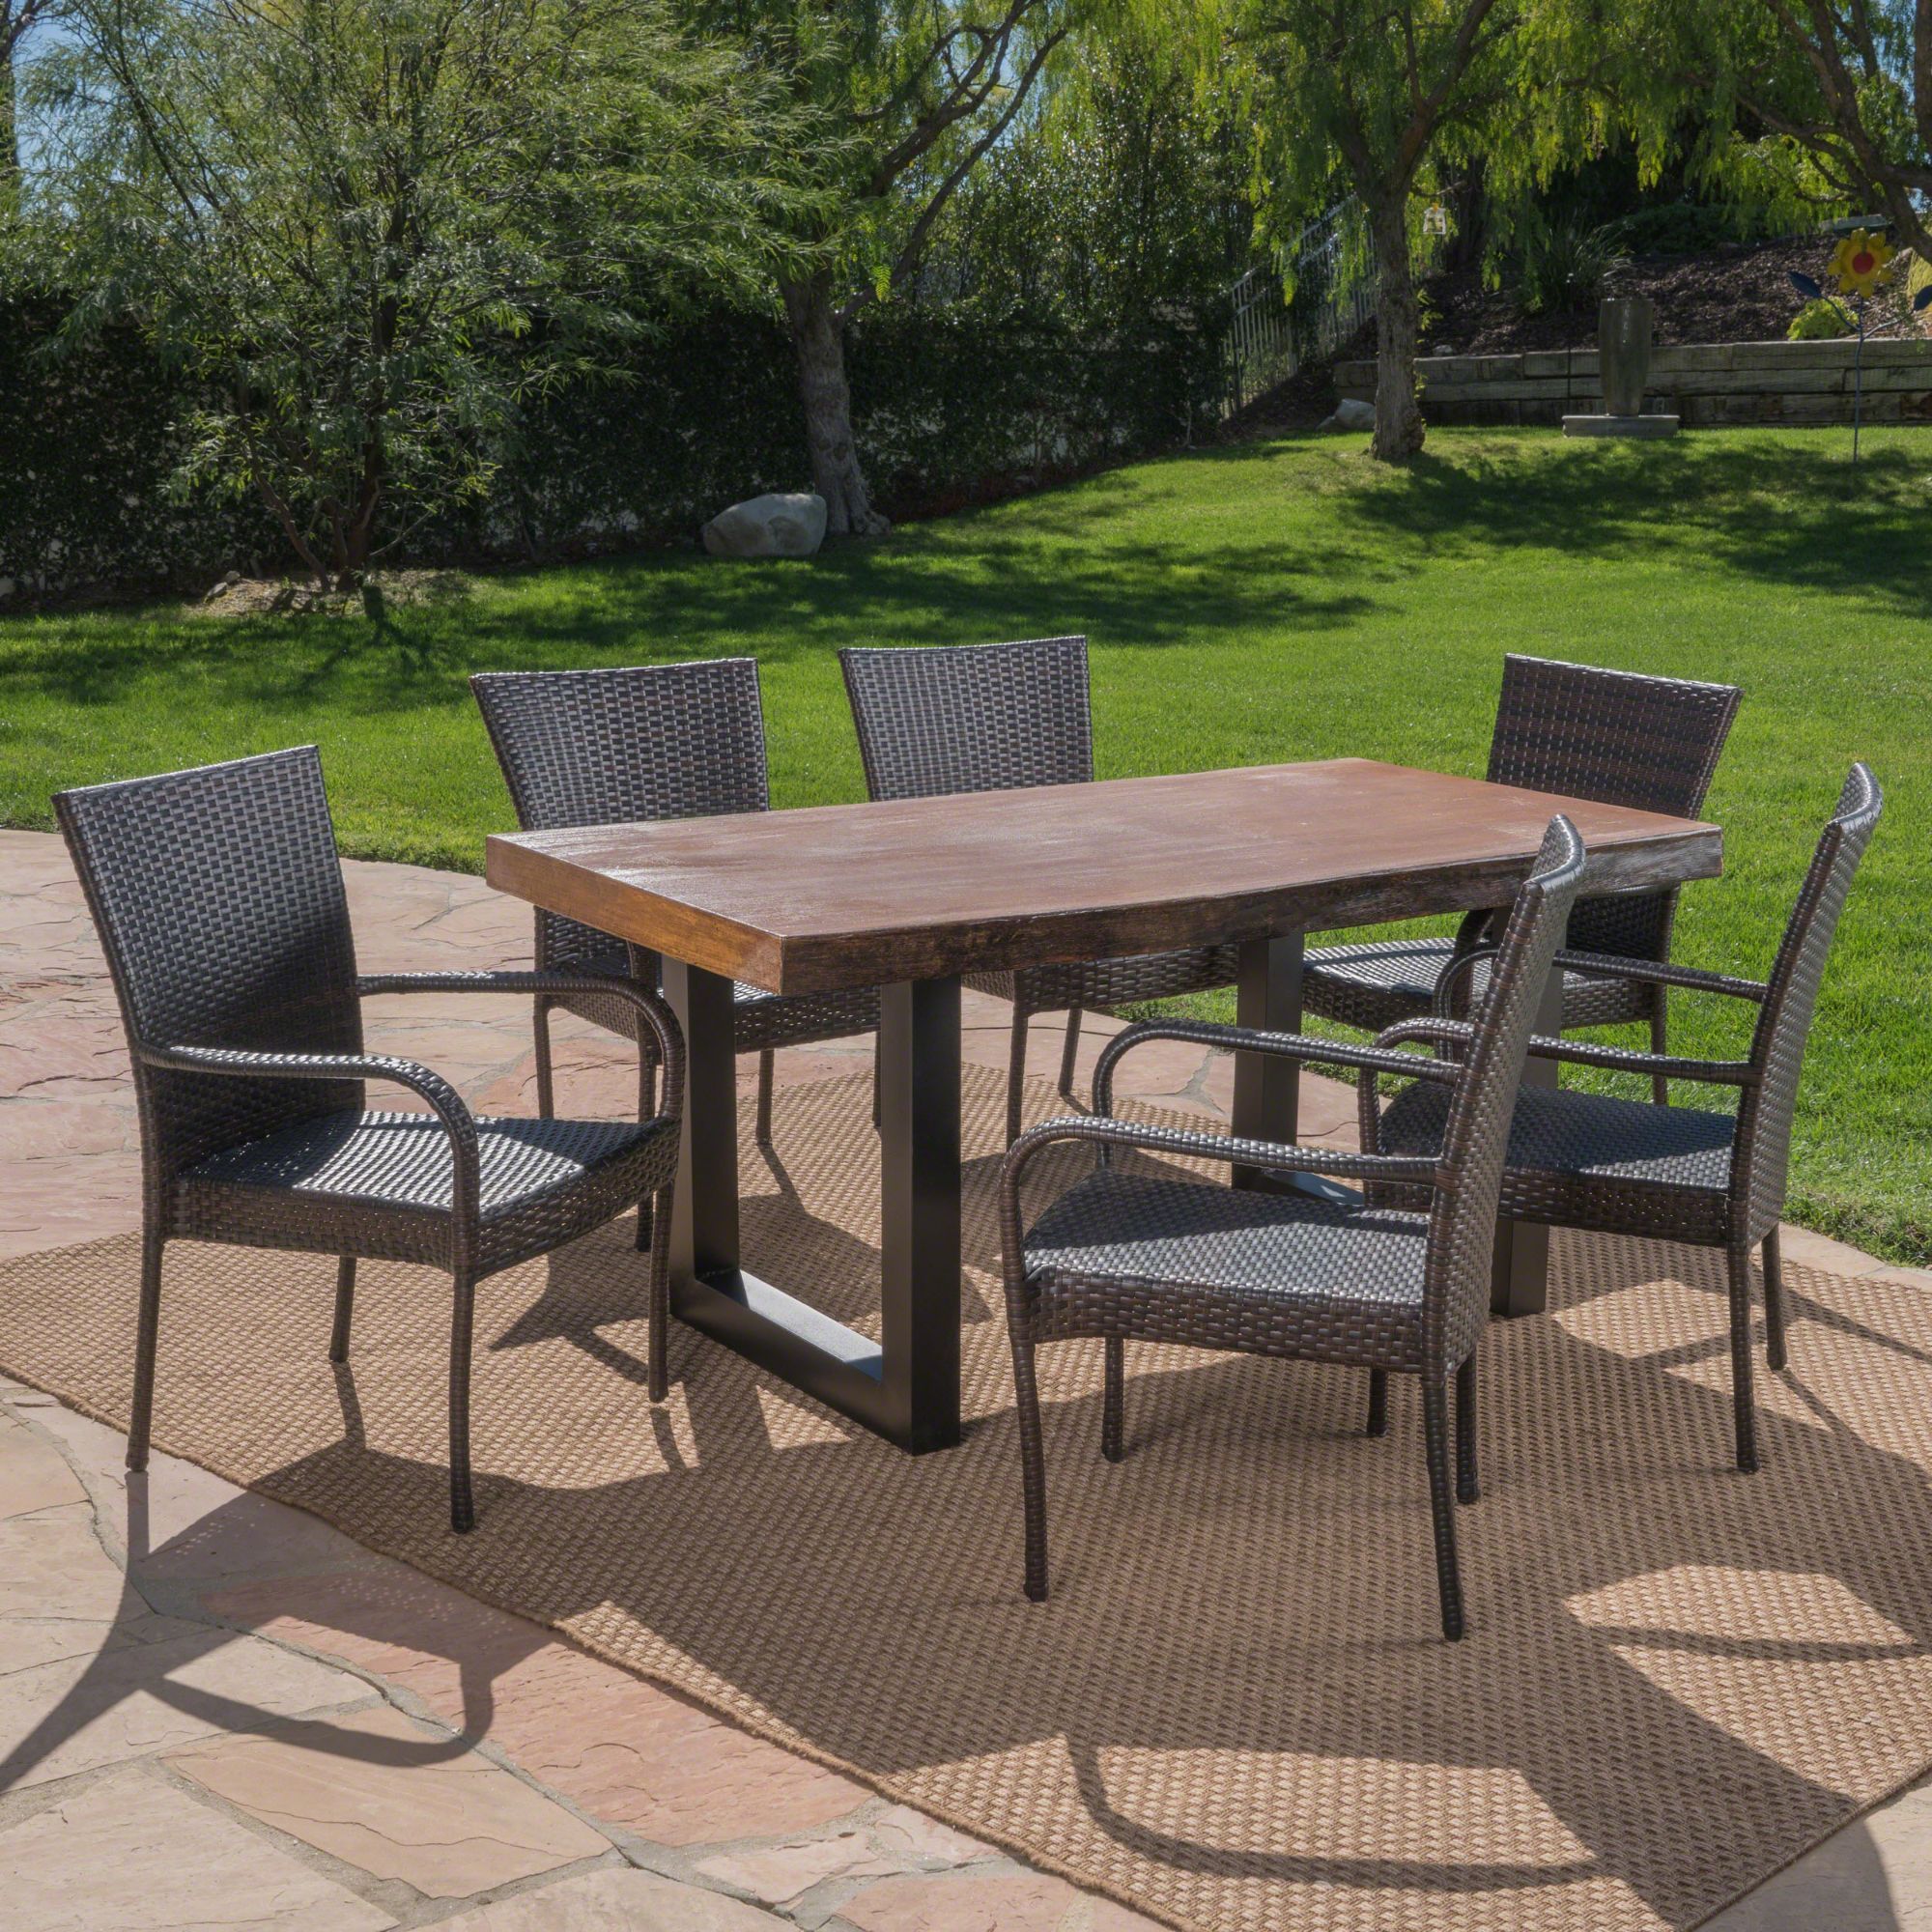 7 Piece Antique Brown And Black Wicker Finish Outdoor Furniture Patio In Dark Brown Patio Dining Sets (View 3 of 15)